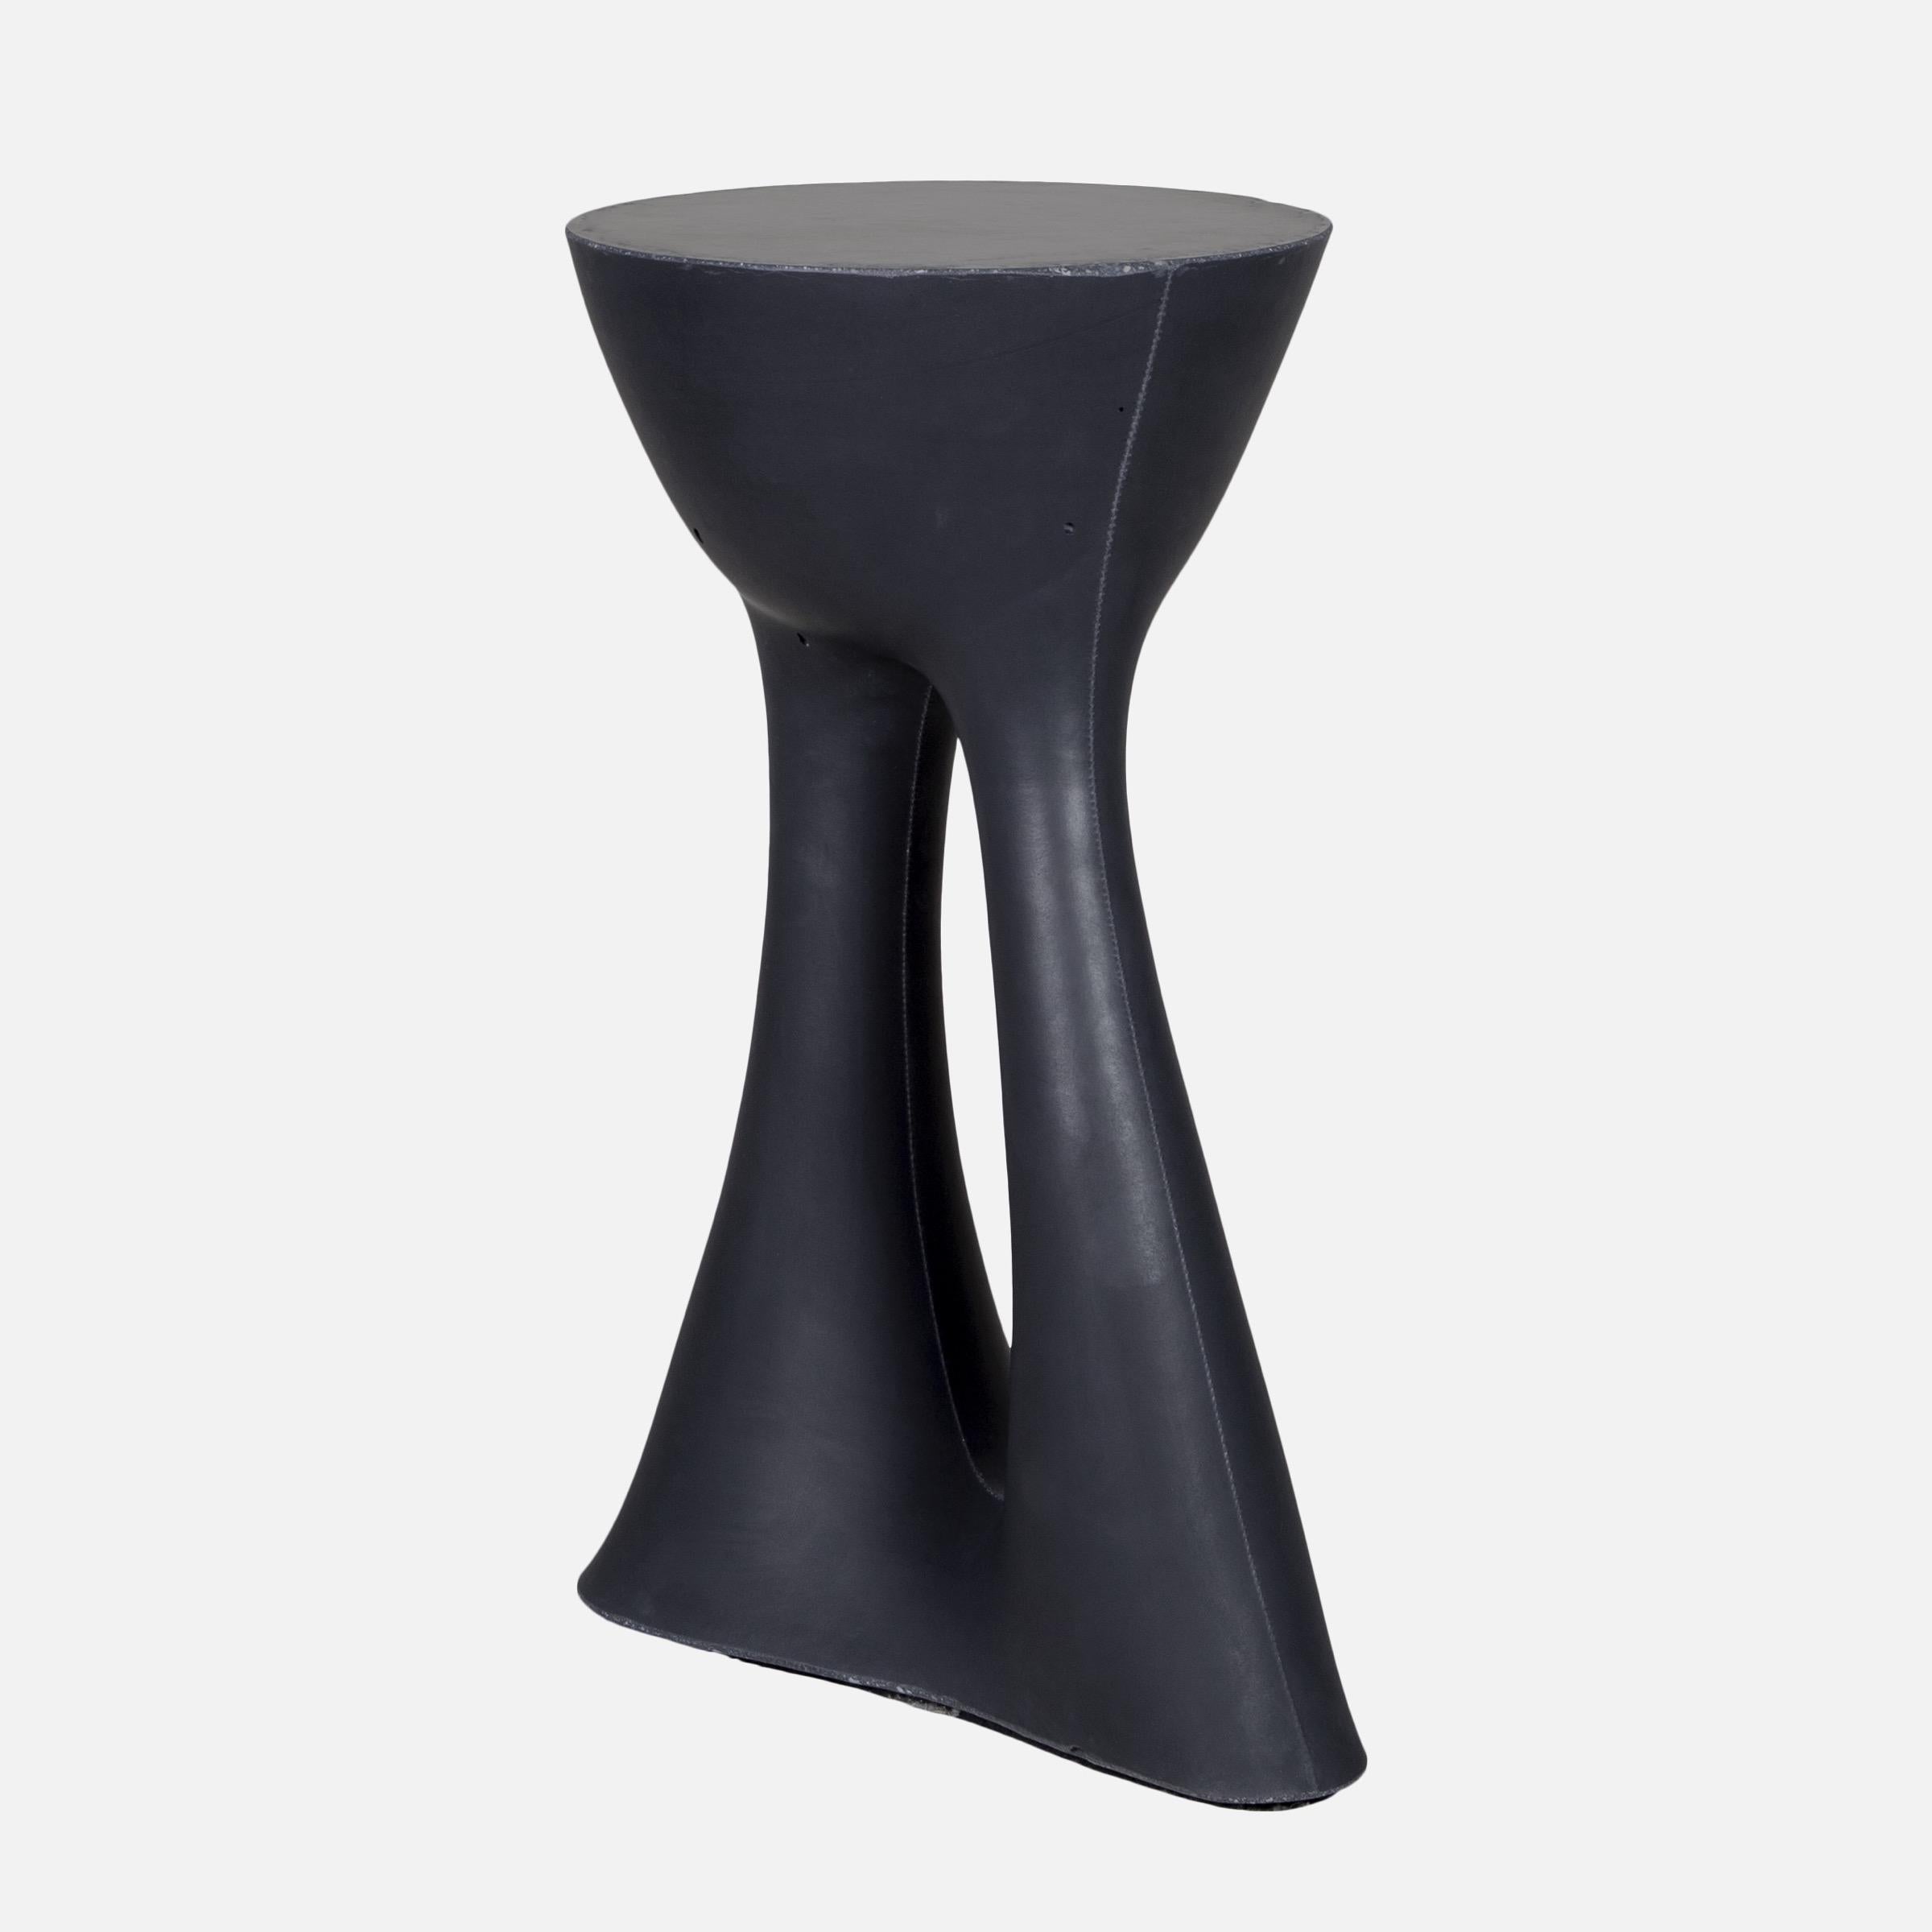 Contemporary Pair of Black Kreten Side Tables from Souda, Short, Made to Order